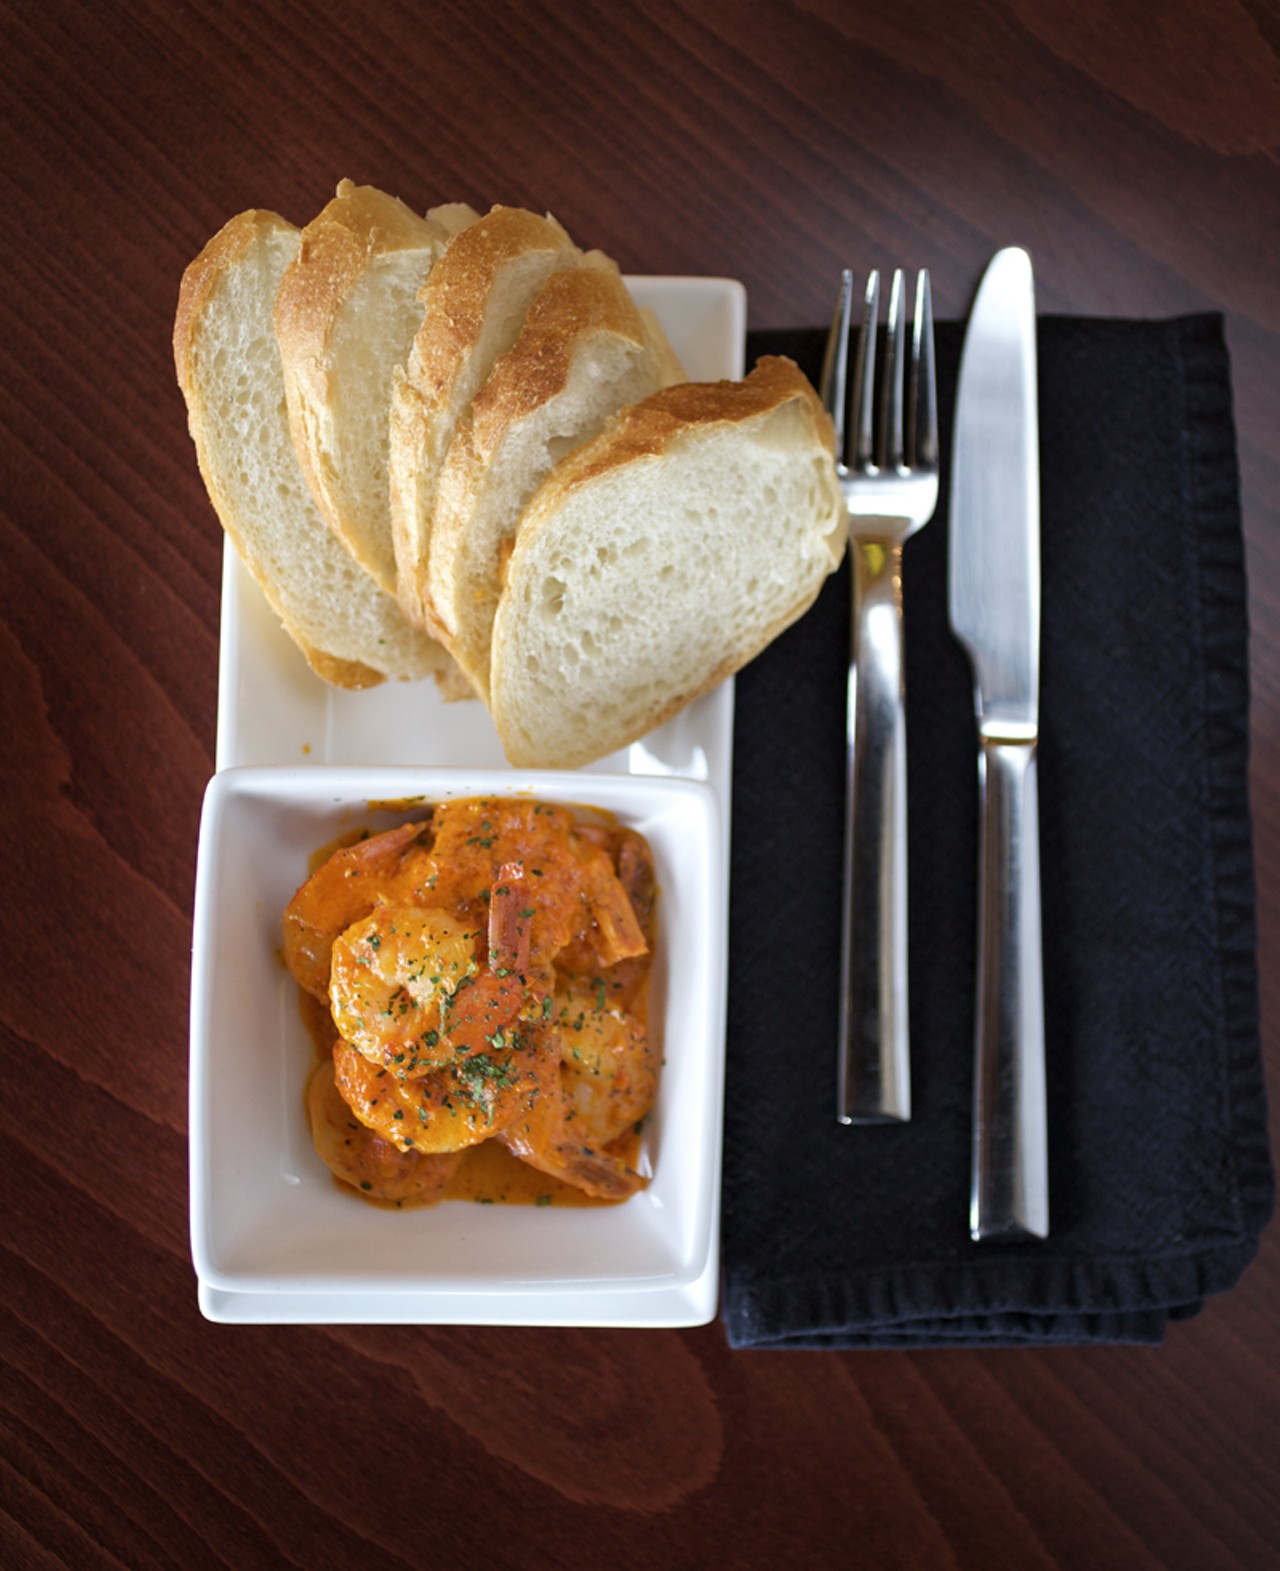 Shrimp Rouille with roasted red pepper, saffron and garlic. Chef Cassandra prepares her rouille less traditionally. Hers is more of the peasants take on rouille where it is eaten by itself with bread to dip.